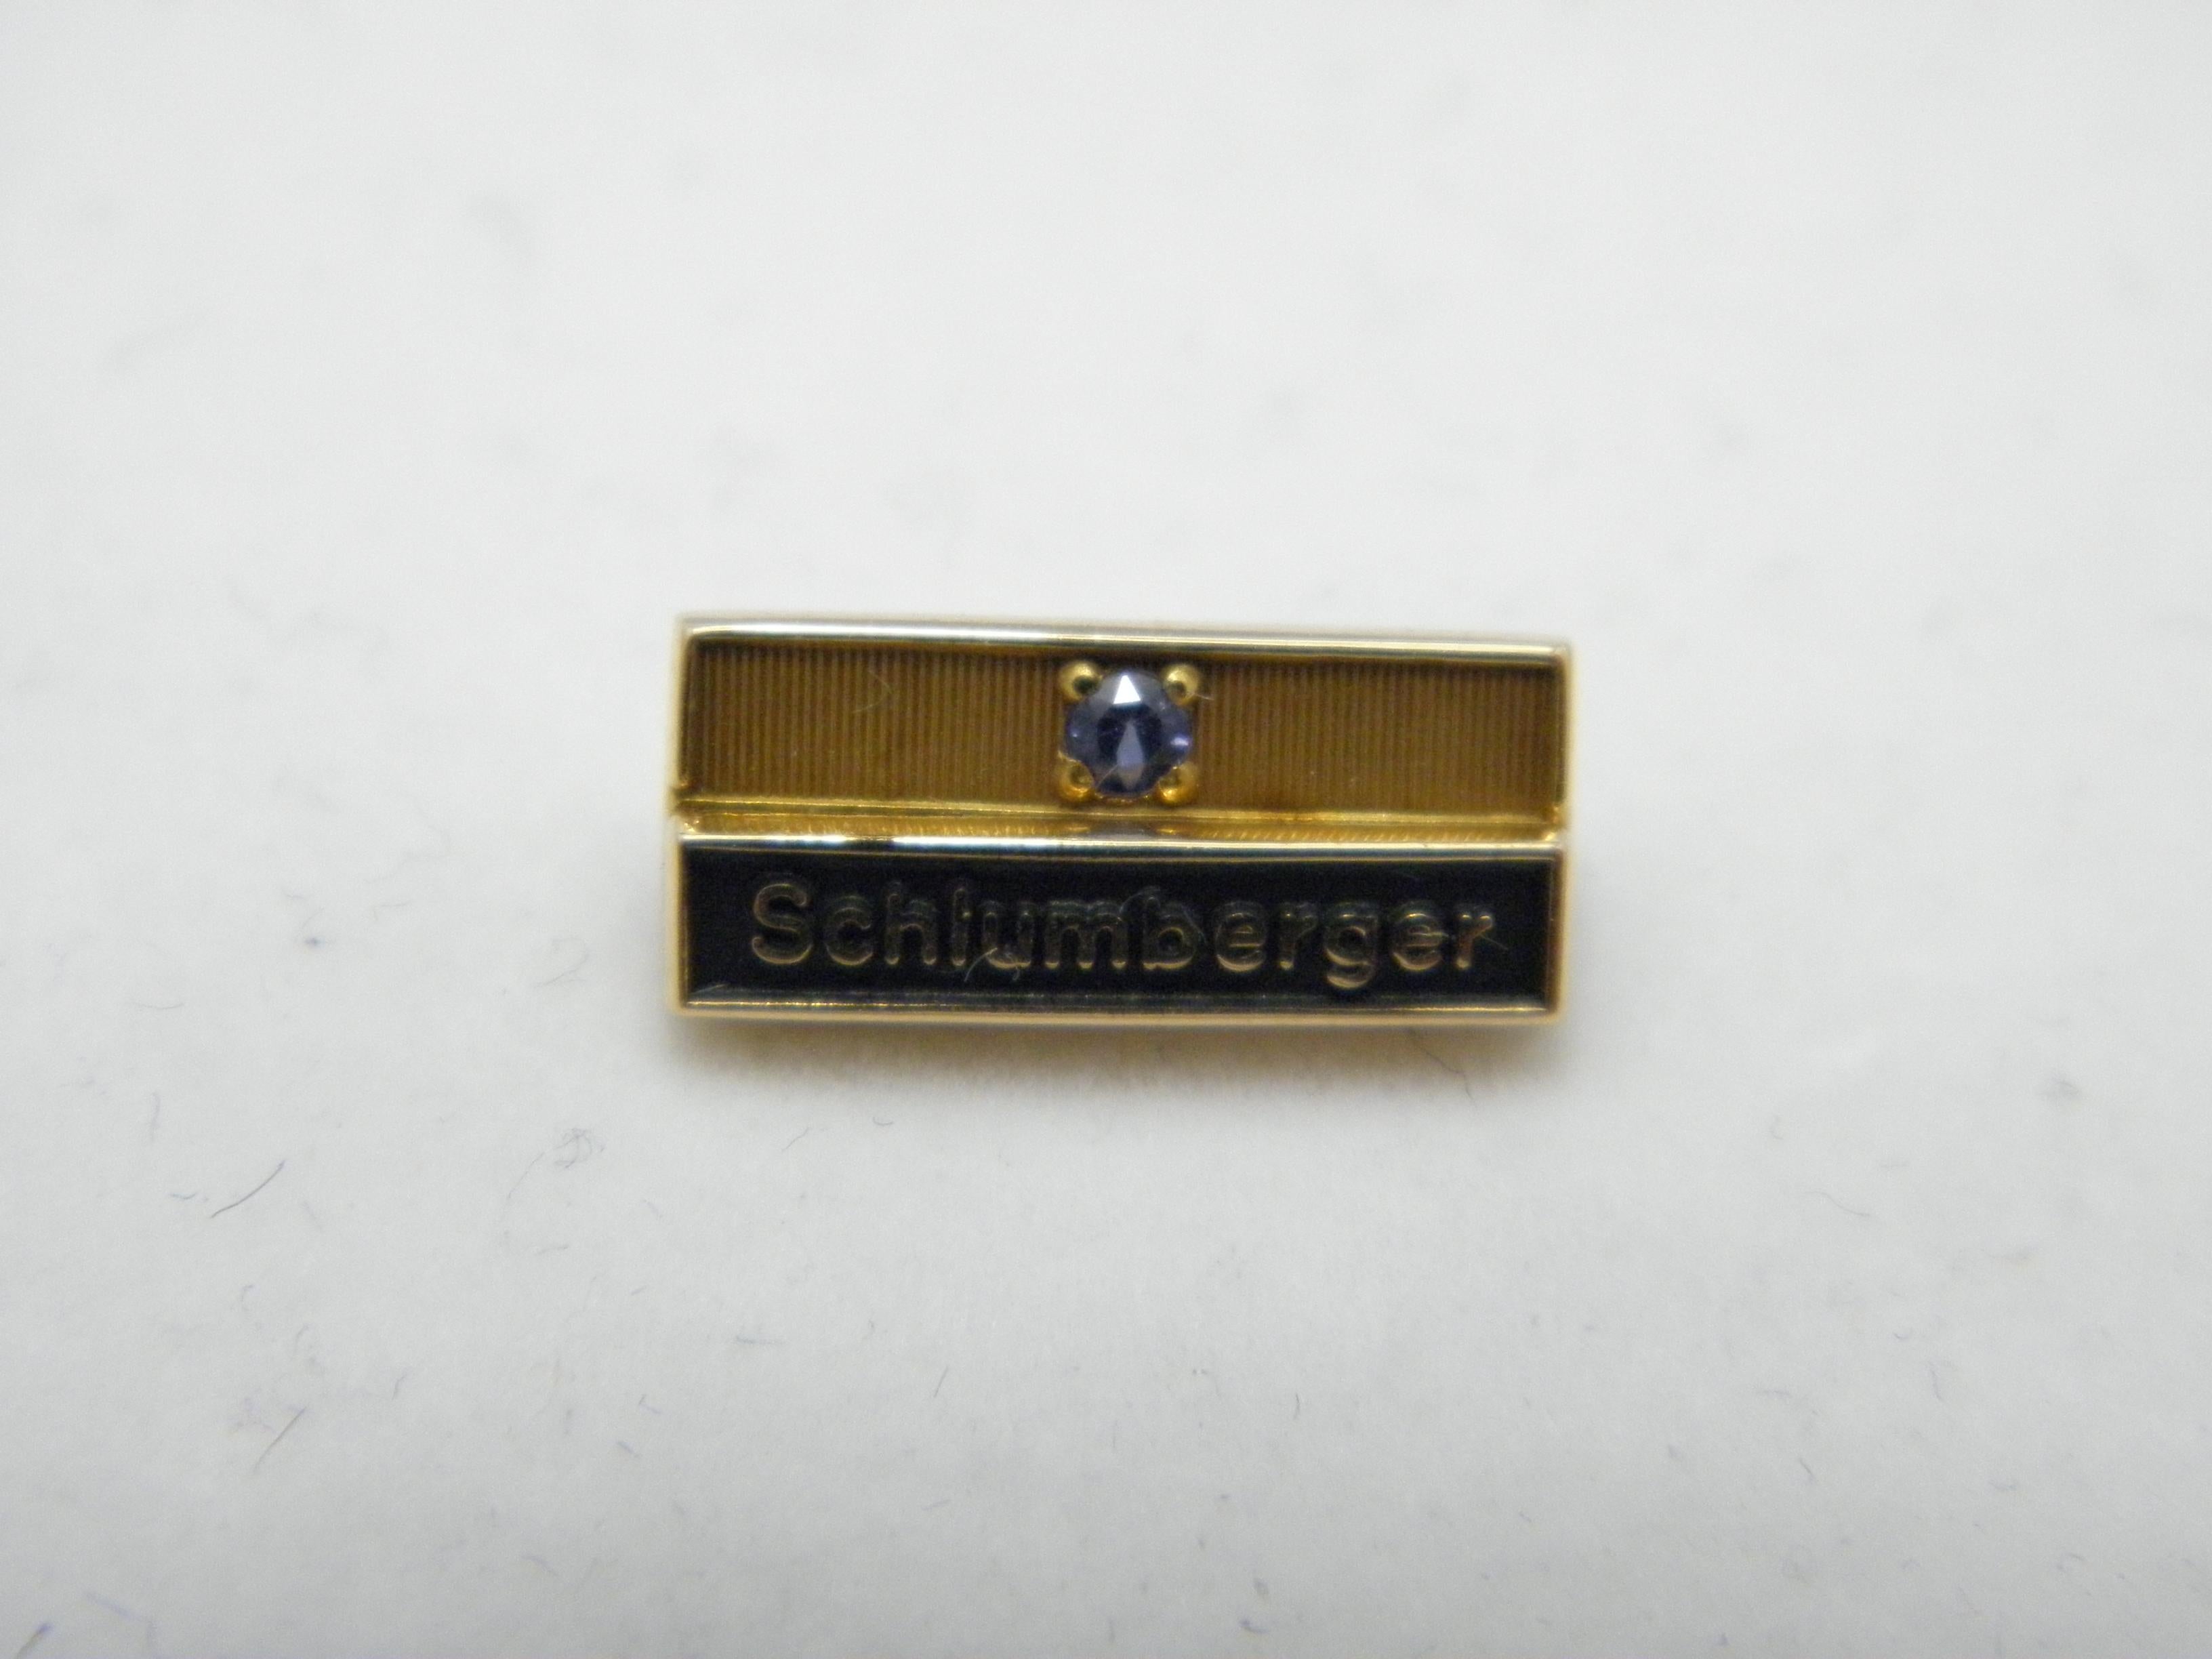 If you have landed on this page then you have an eye for beauty.

On offer is this gorgeous

RARE 14CT SOLID GOLD SAPPHIRE SCHLUMBERGER LAPEL BROOCH

DETAILS
Material: 14ct (585/000) Solid Thick Yellow Gold
Style: Schlumberger Lapel Brooch / Pin,